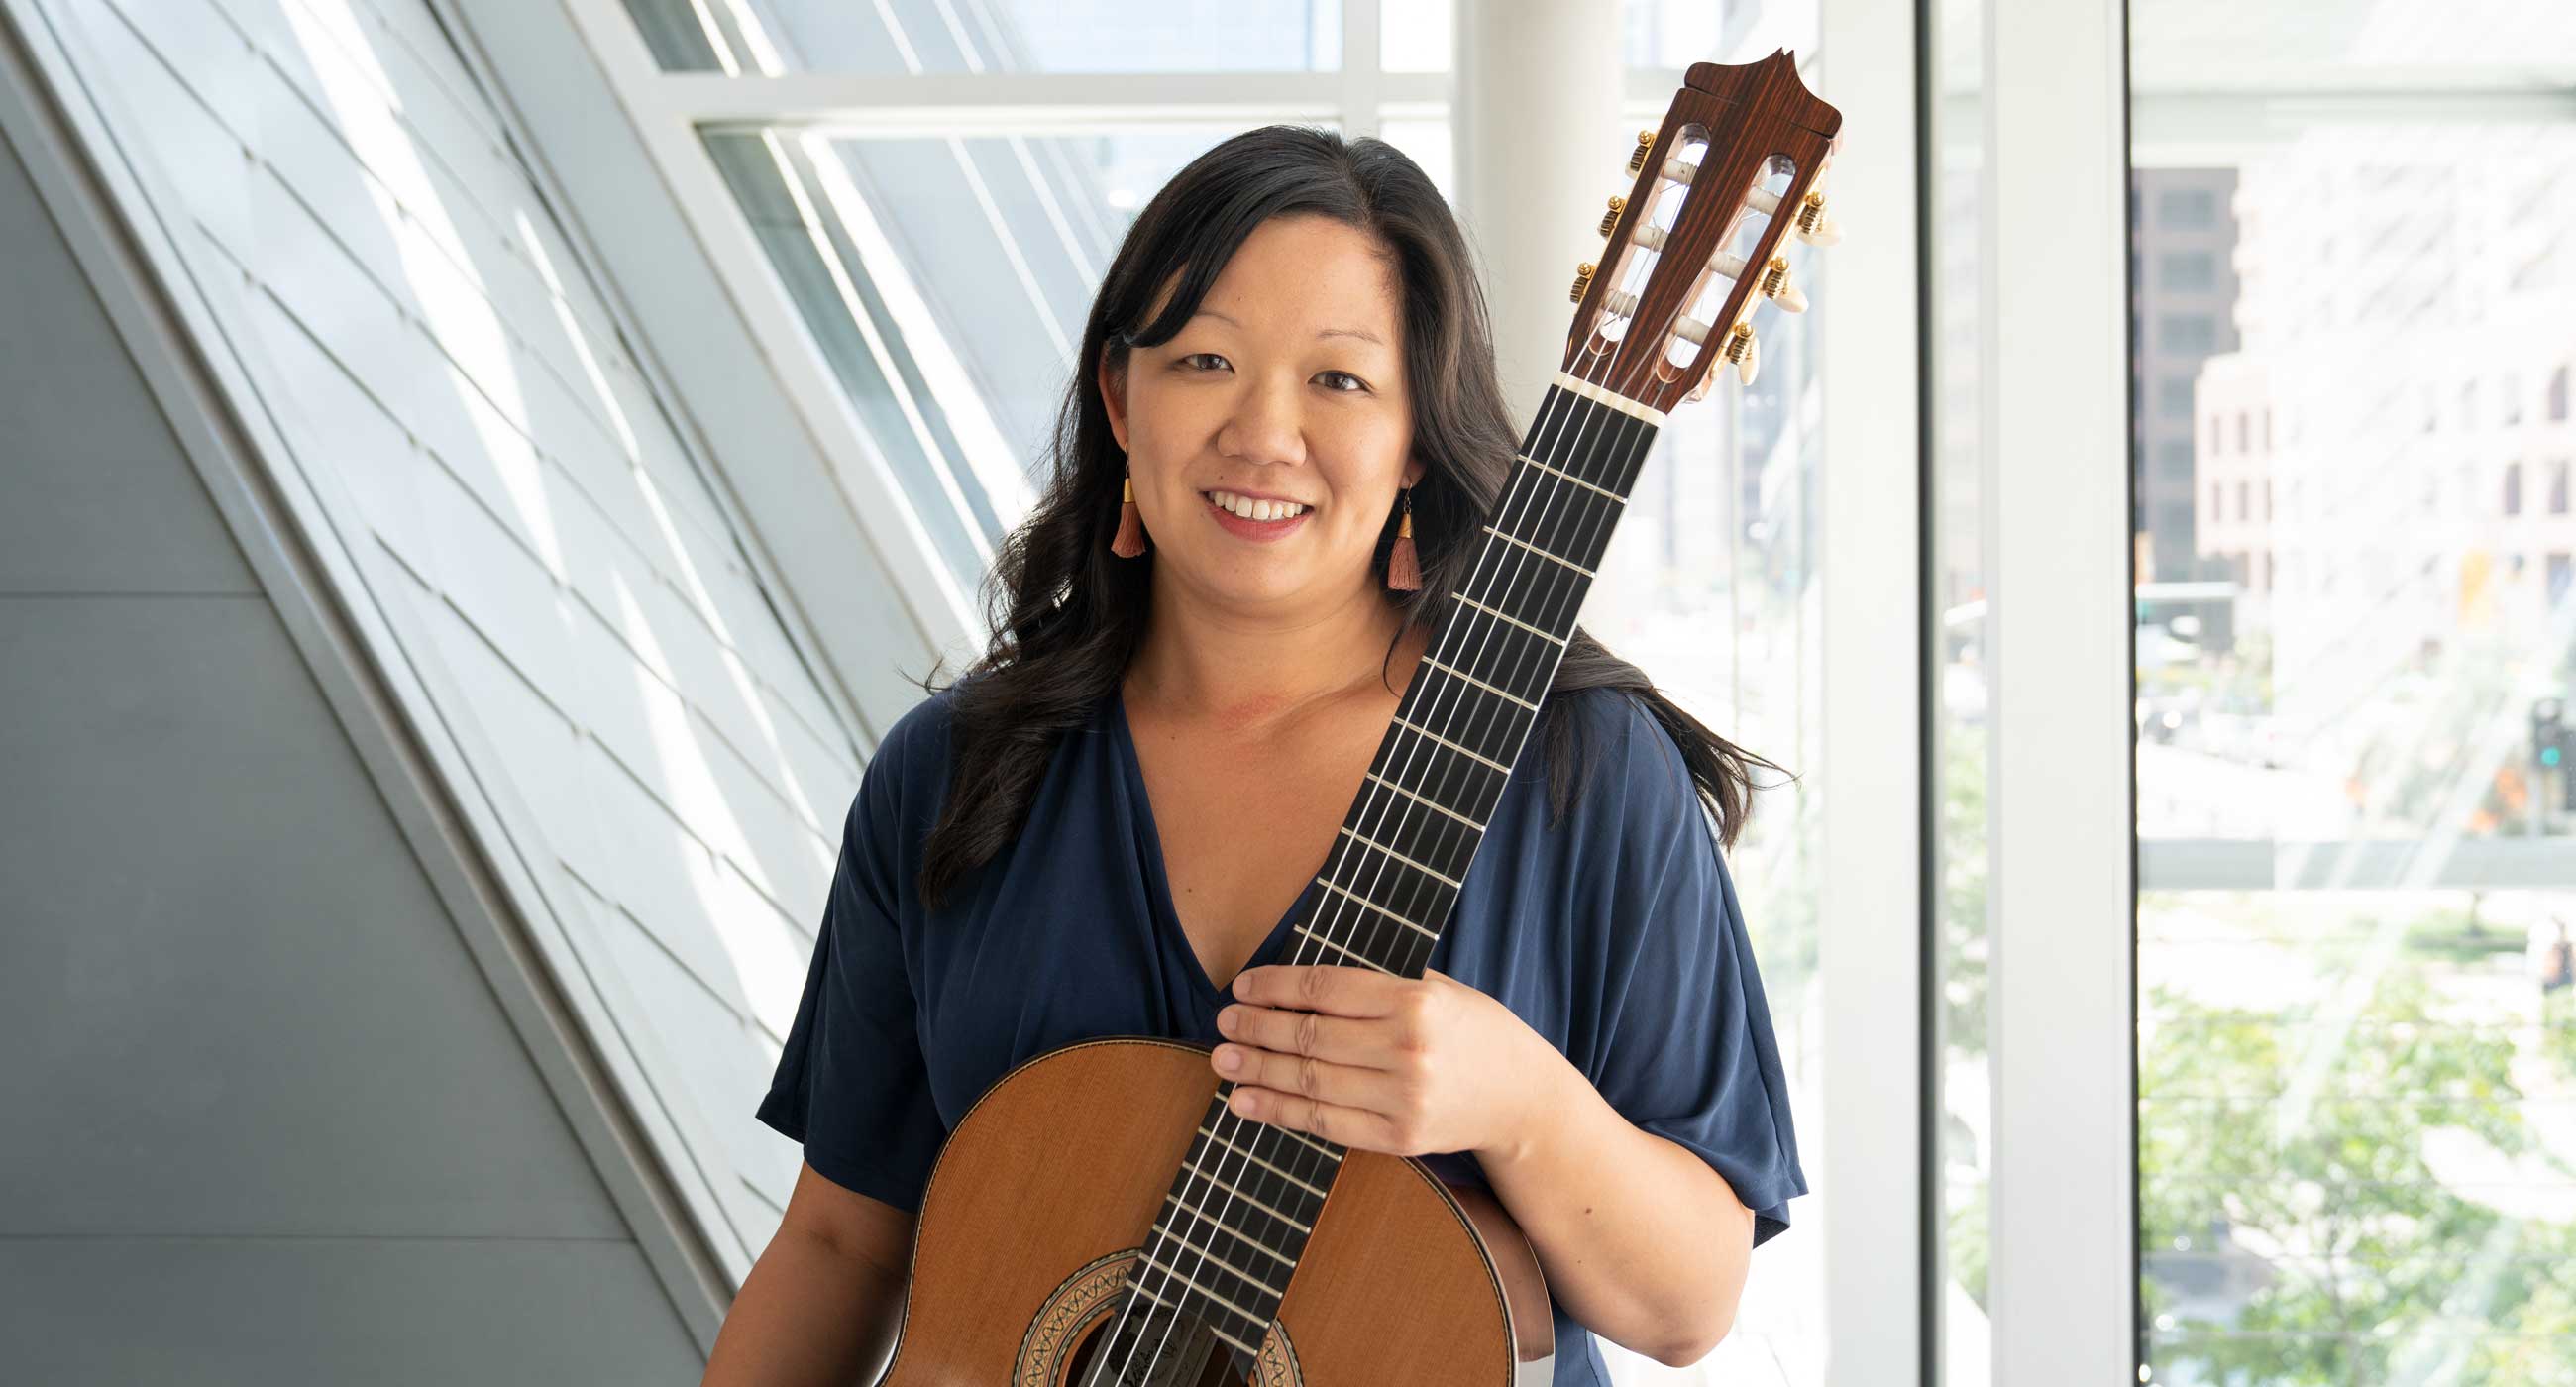 Connie Sheu holding a classical guitar and smiling in front of a window. She is wearing tassel earrings.